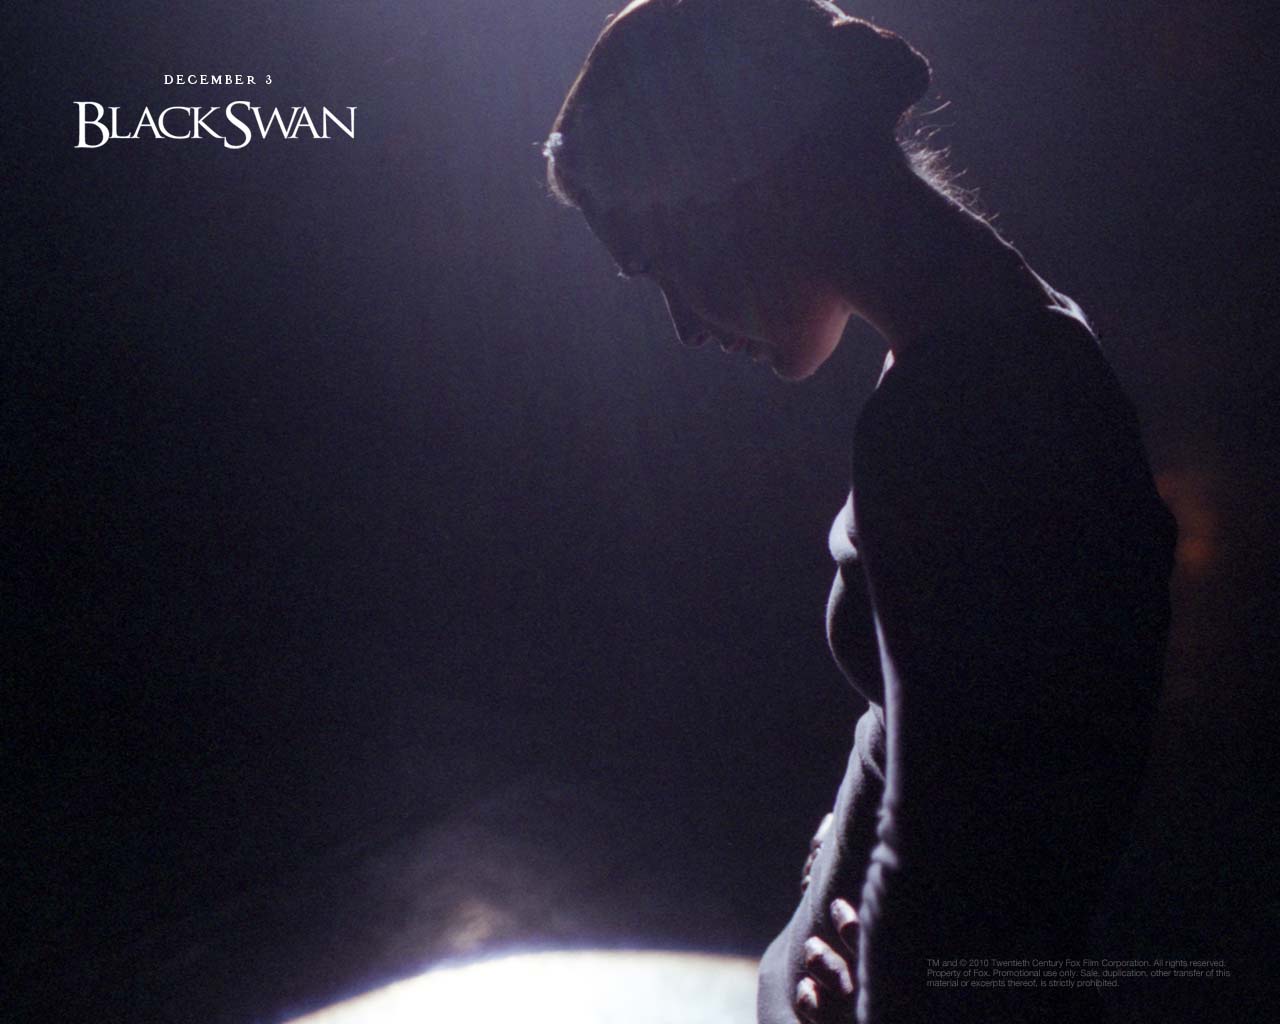 MILLION OF WALLPAPERS.COM: BLACK SWAN MOVIE WALLPAPERS